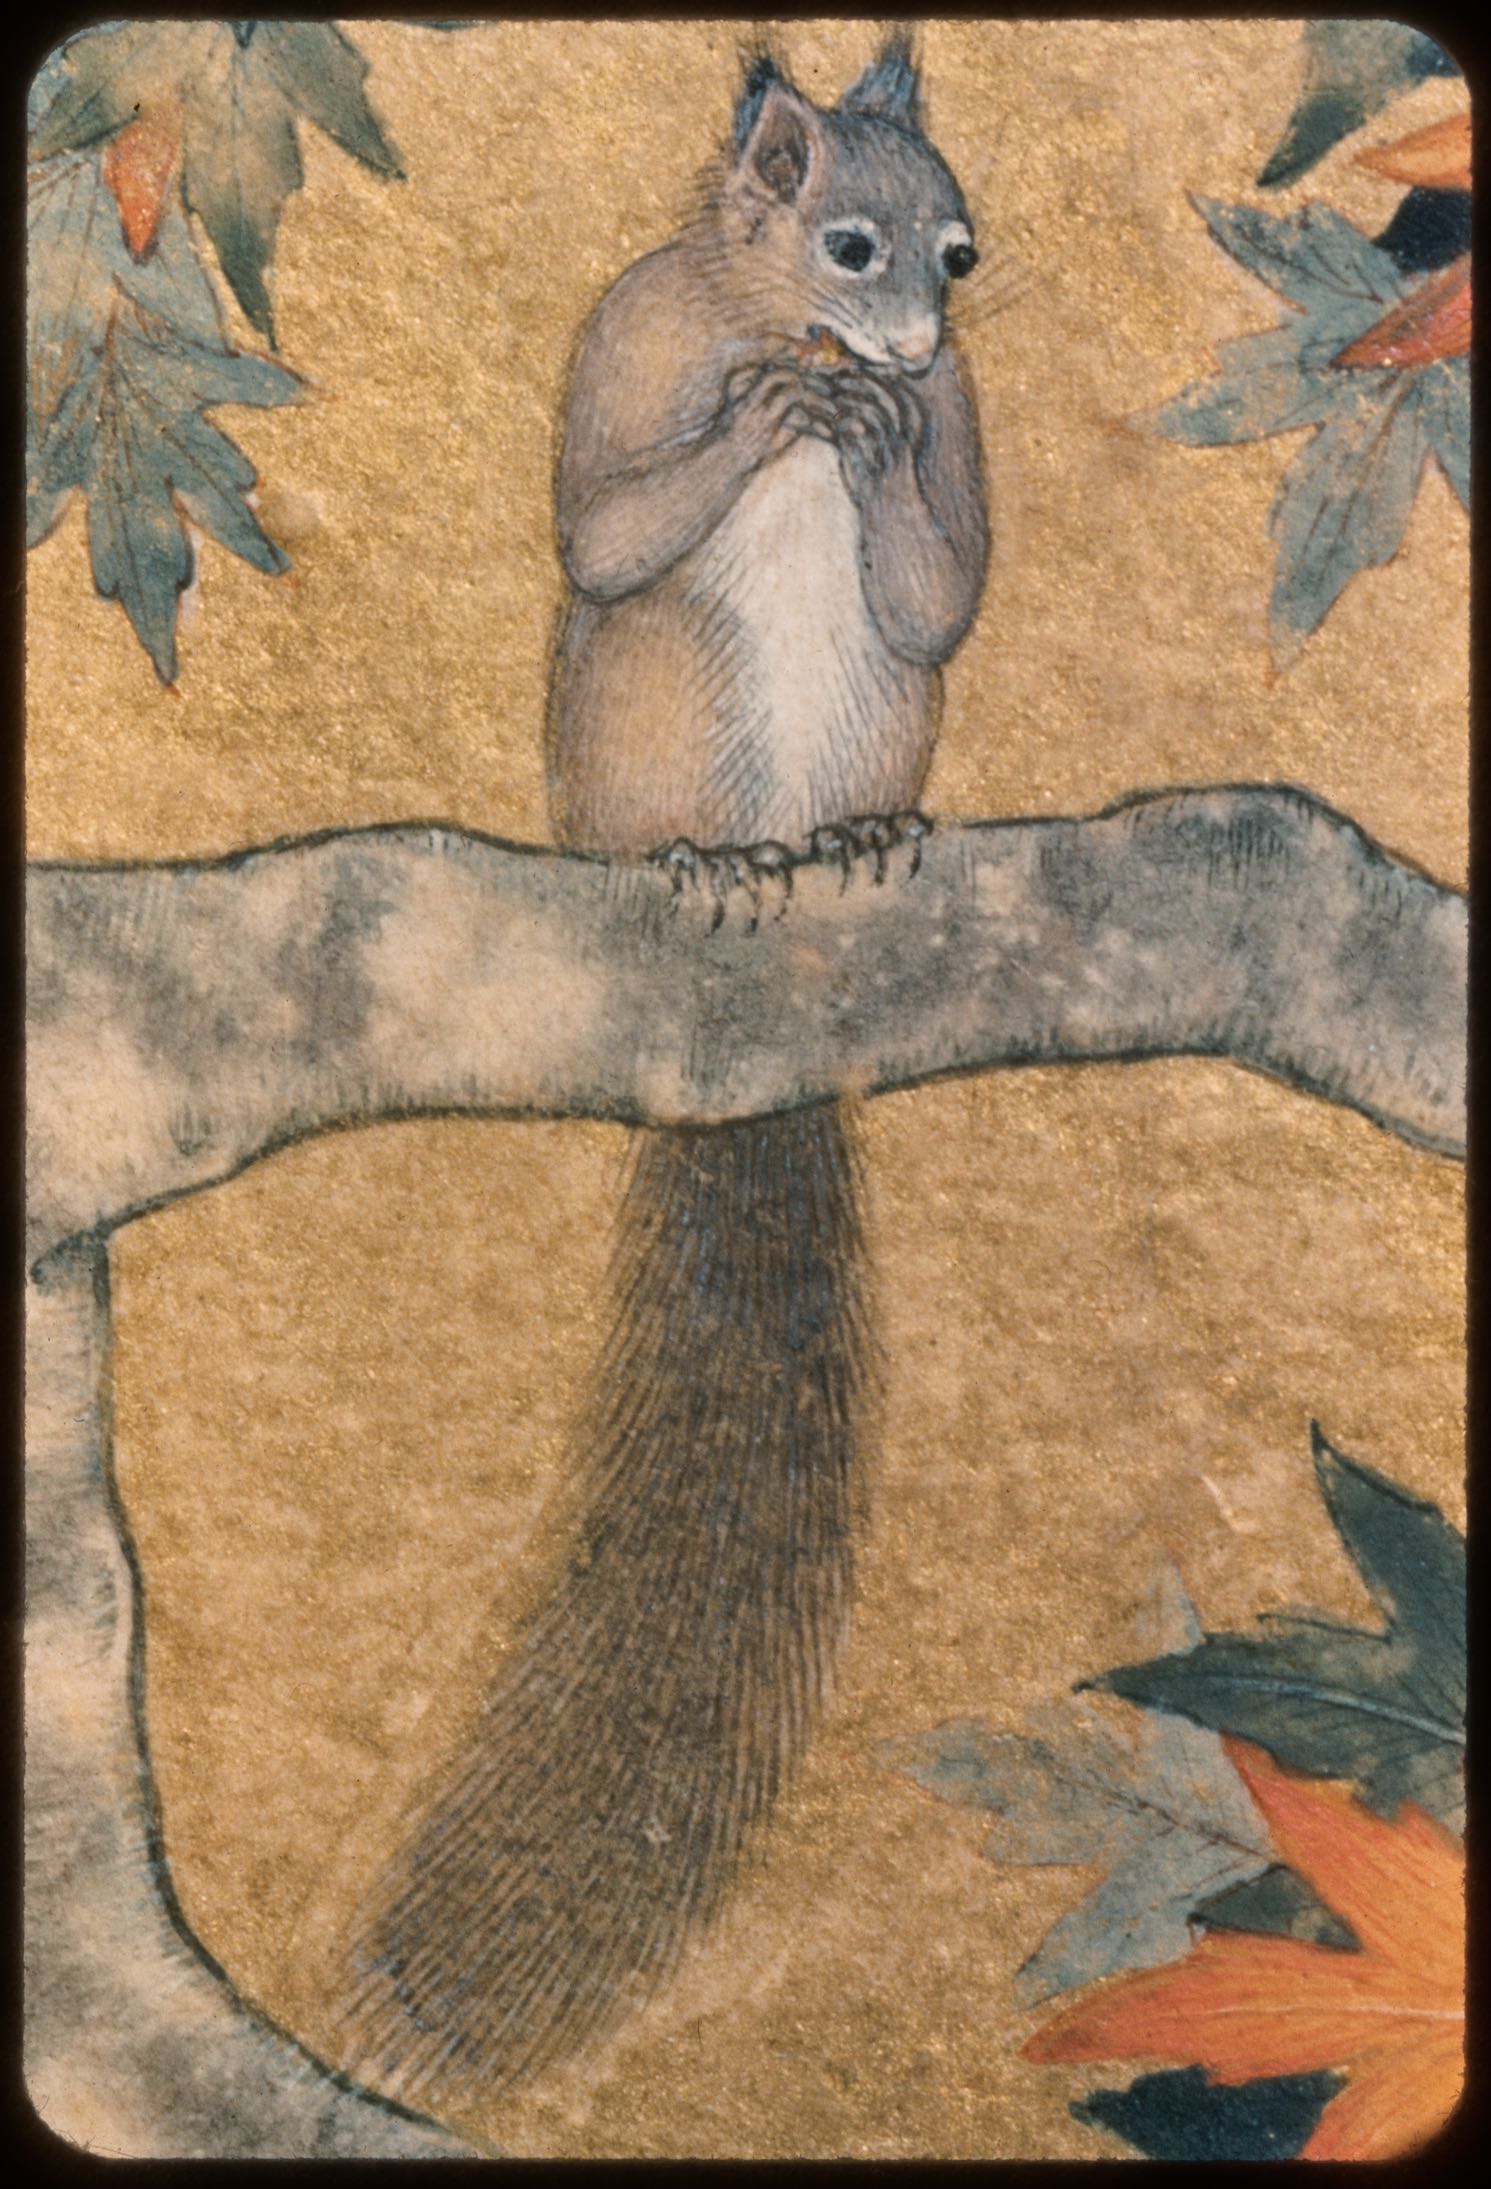 Detail of squirrel eating a nut, Squirrels in a Plane Tree (British Library, Johnson Album 1/30)